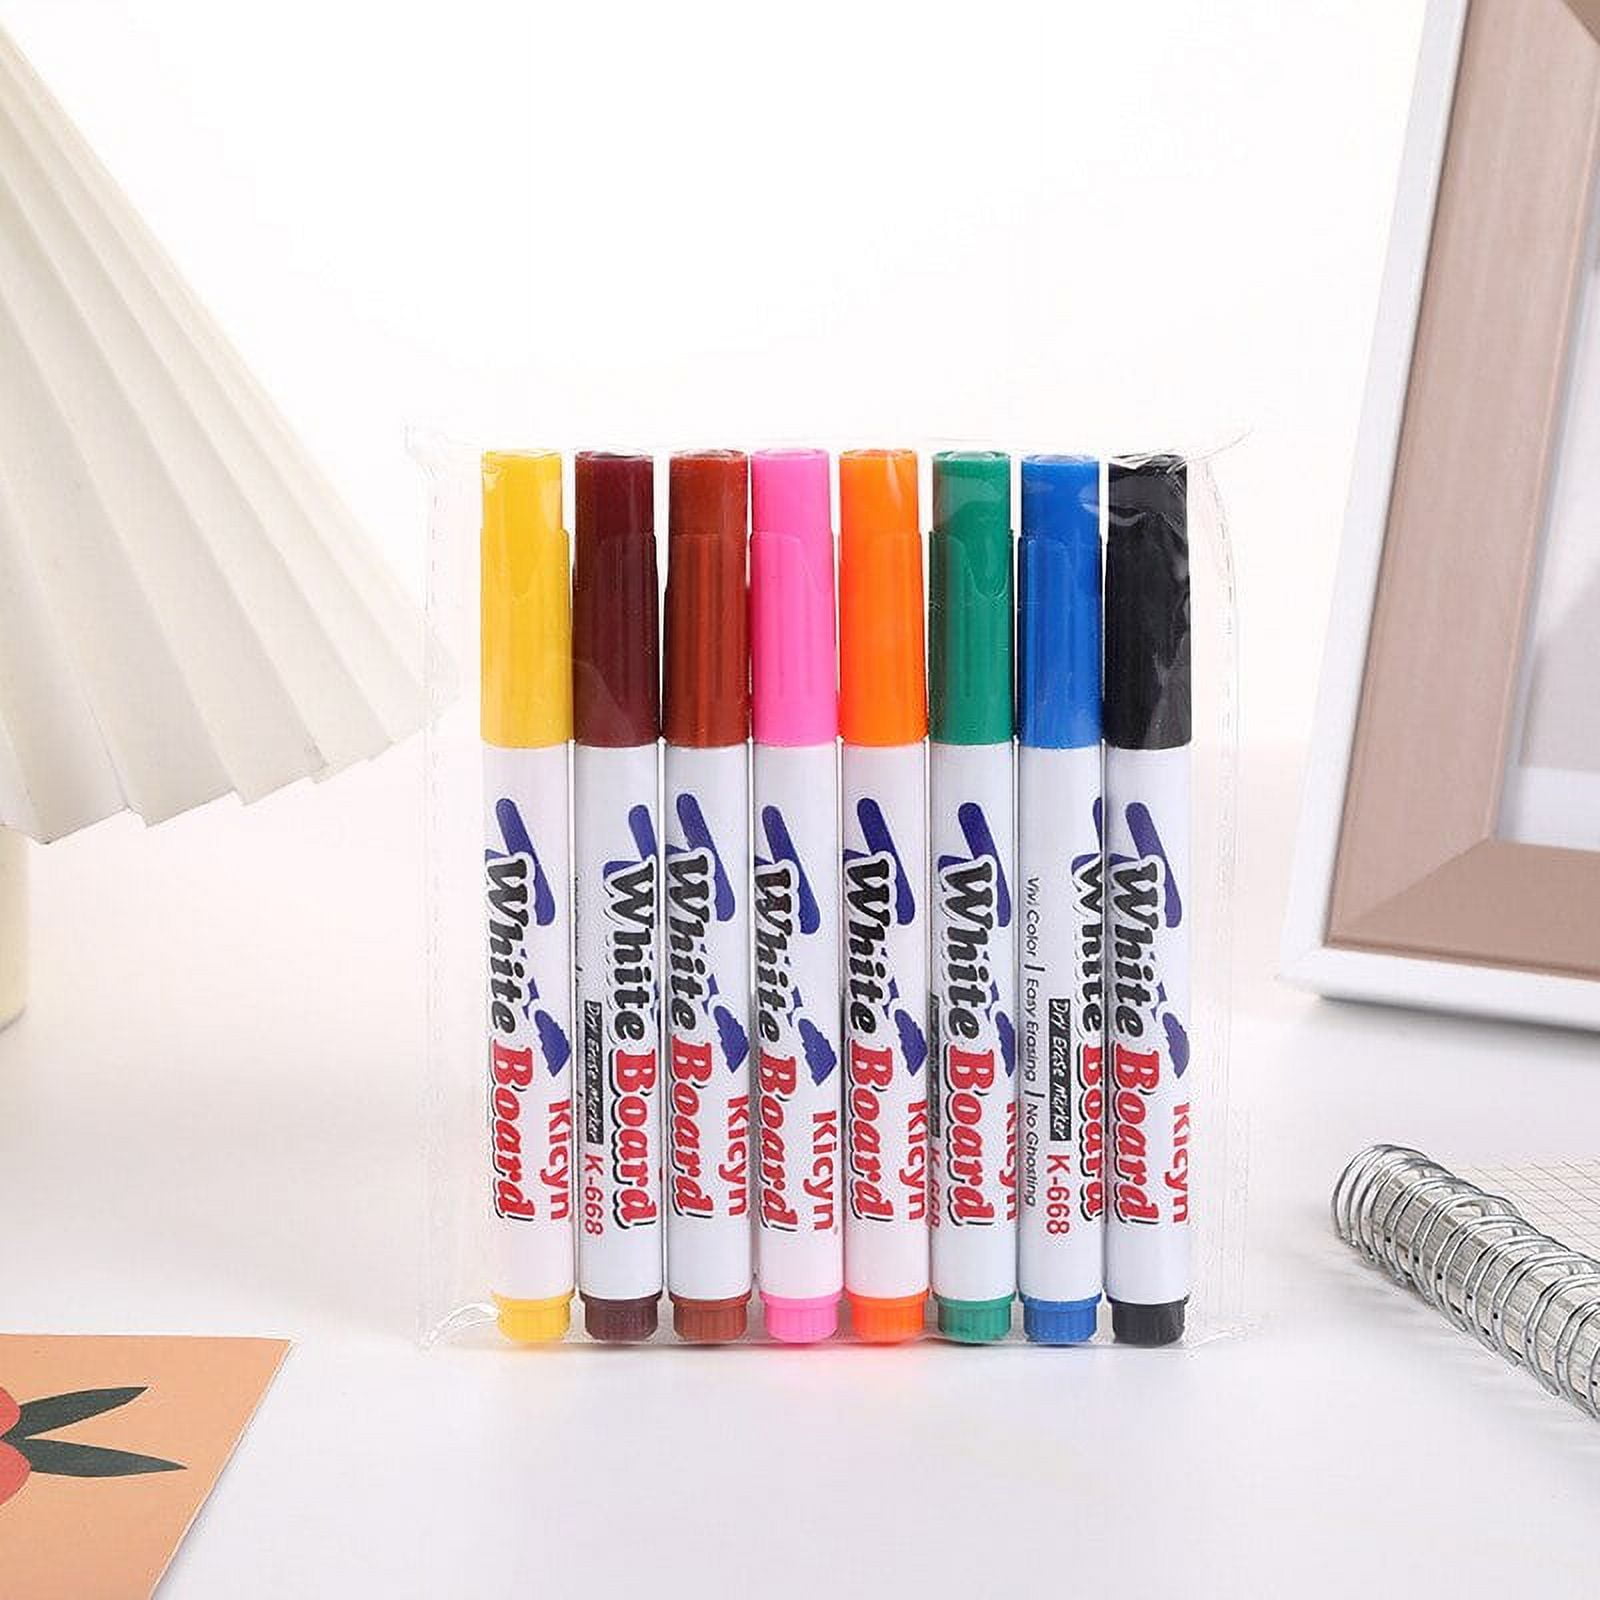 Magical Water Painting Pen Water Floating Doodle Pen Colorful Kids Drawing  Marker Early Education Toy Magic Whiteboard Marker